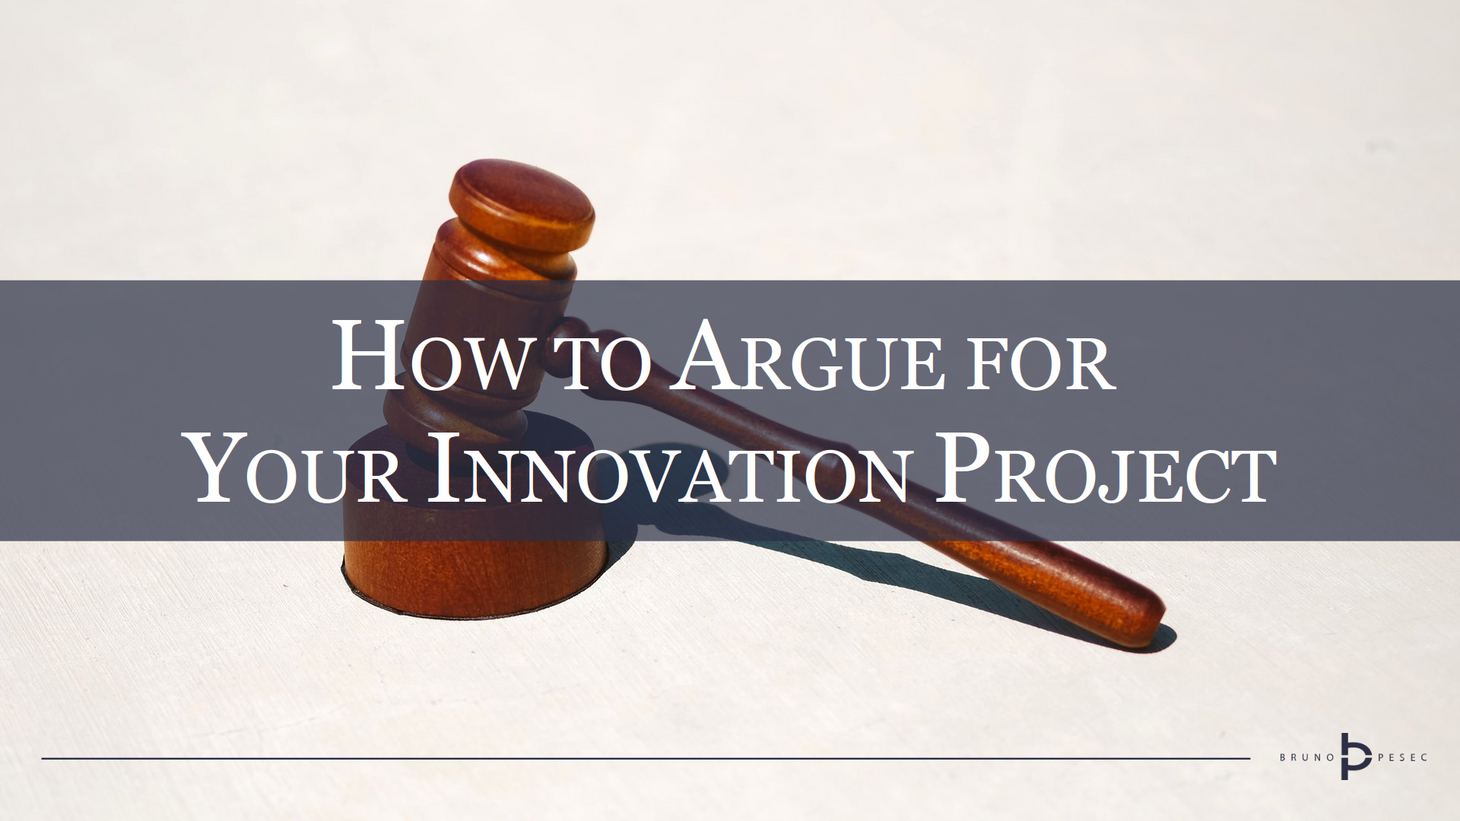 How to argue for your innovation project